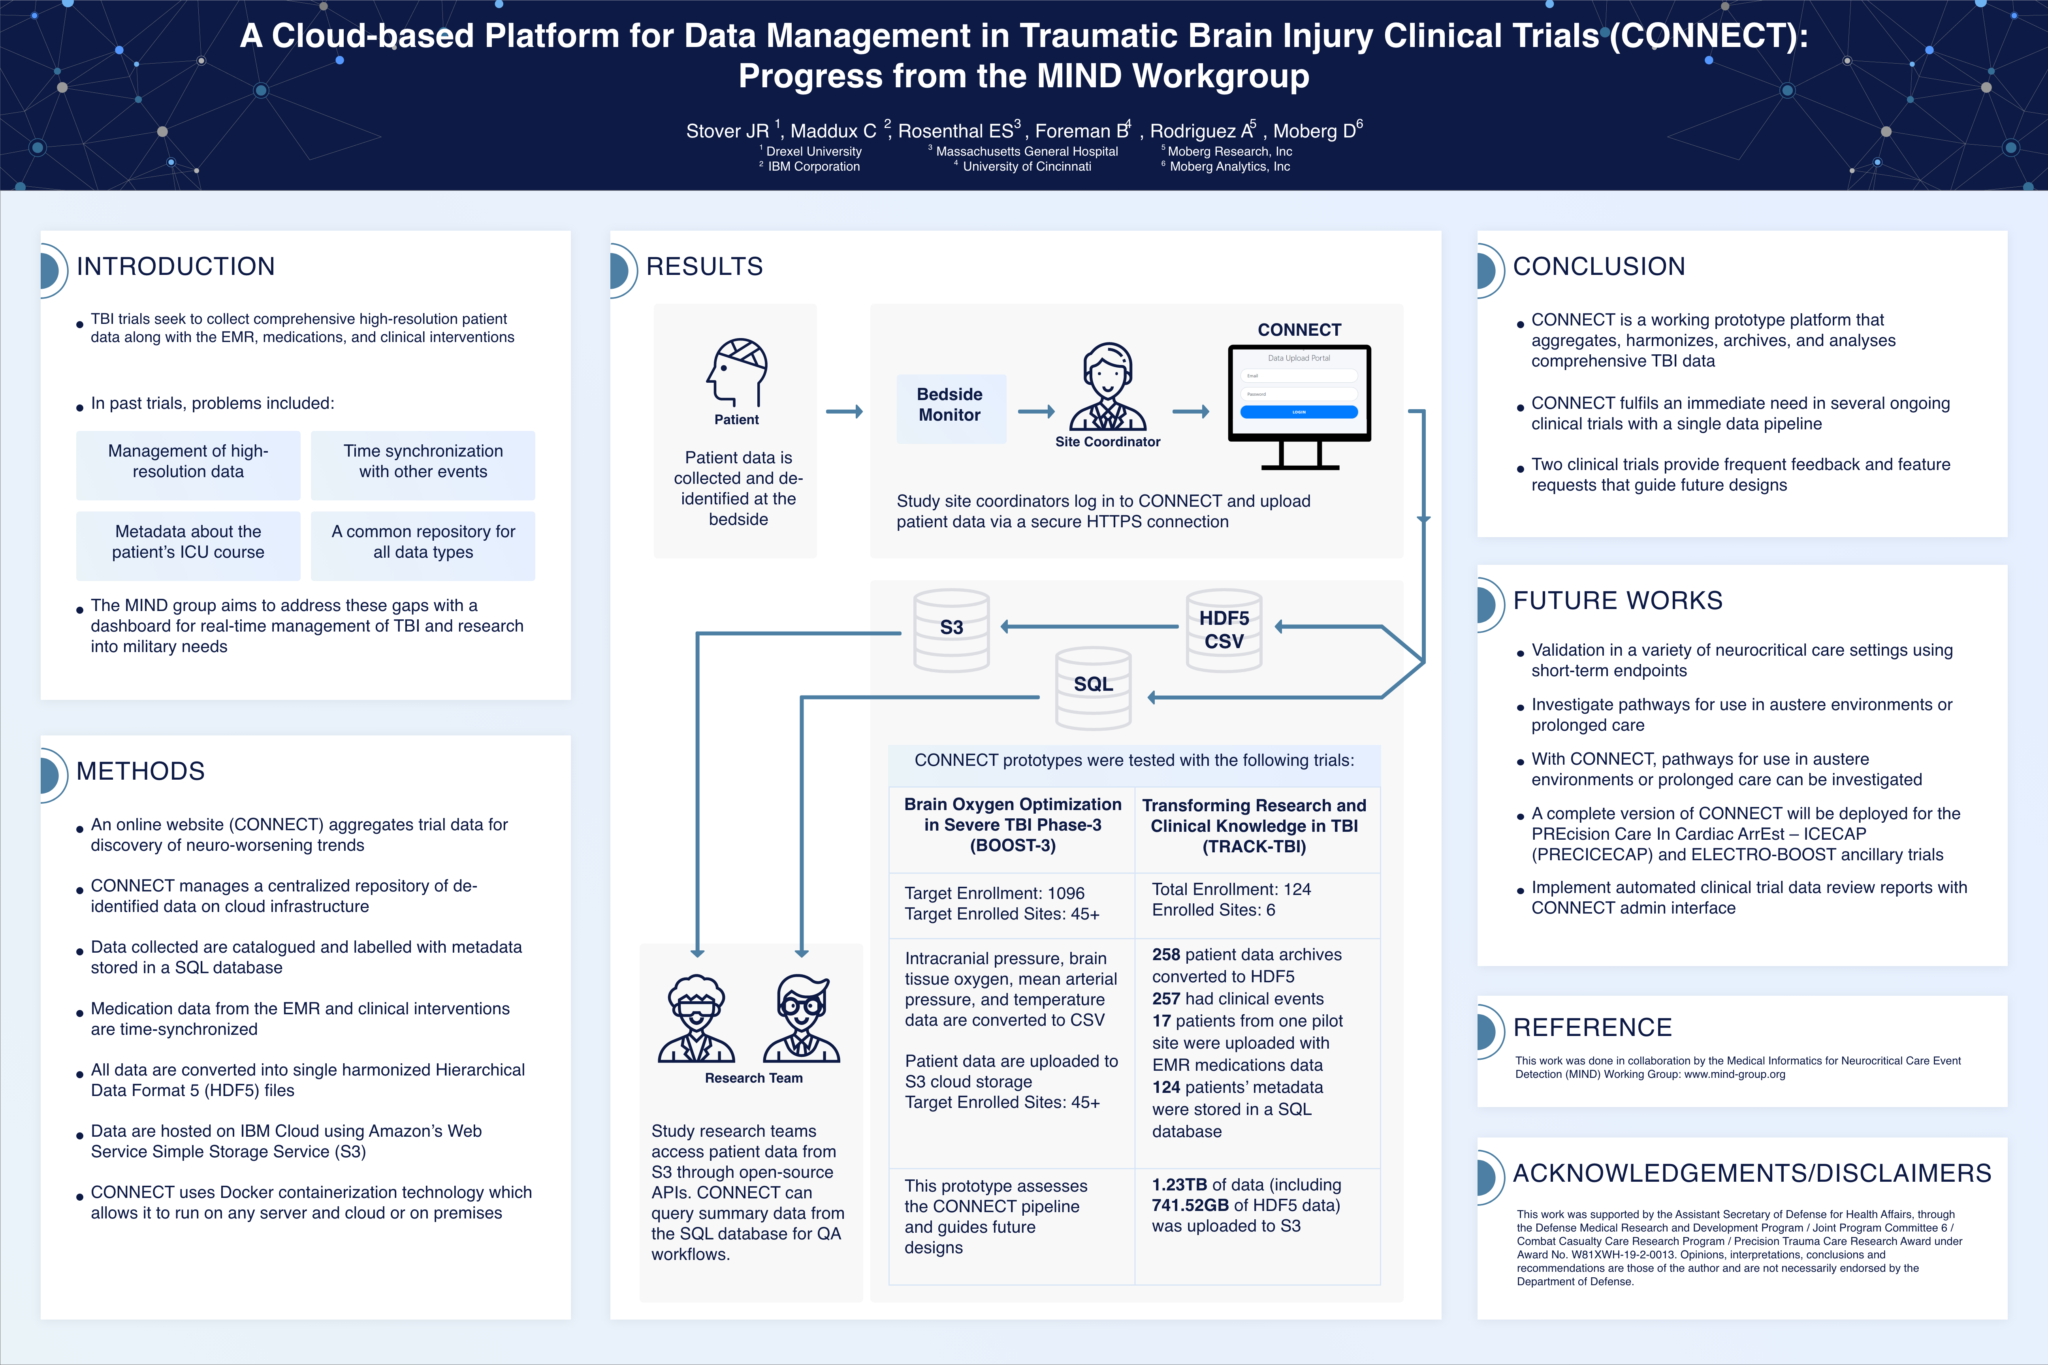 A Cloud-Based Platform for Data Management in Traumatic Brain Injury Clinical Trials (CONNECT): Progress from the MIND Workgroup